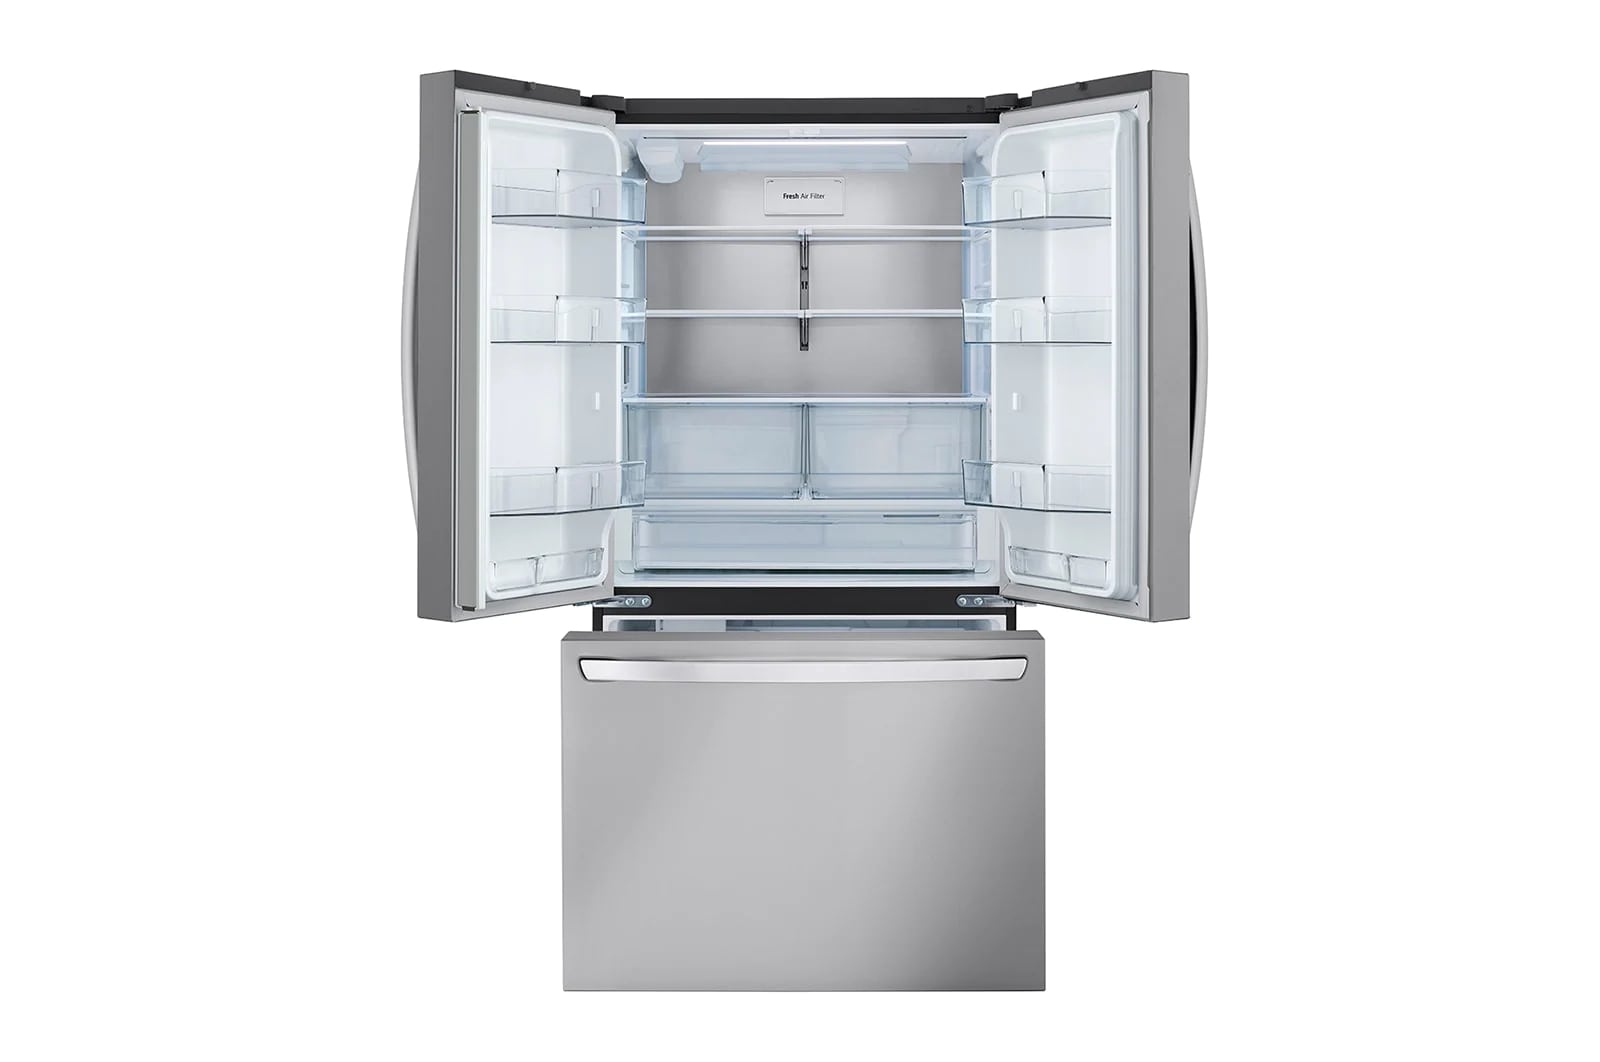 LG - 35.75 Inch 27 cu. ft French Door Refrigerator in Stainless - LRFLC2706S